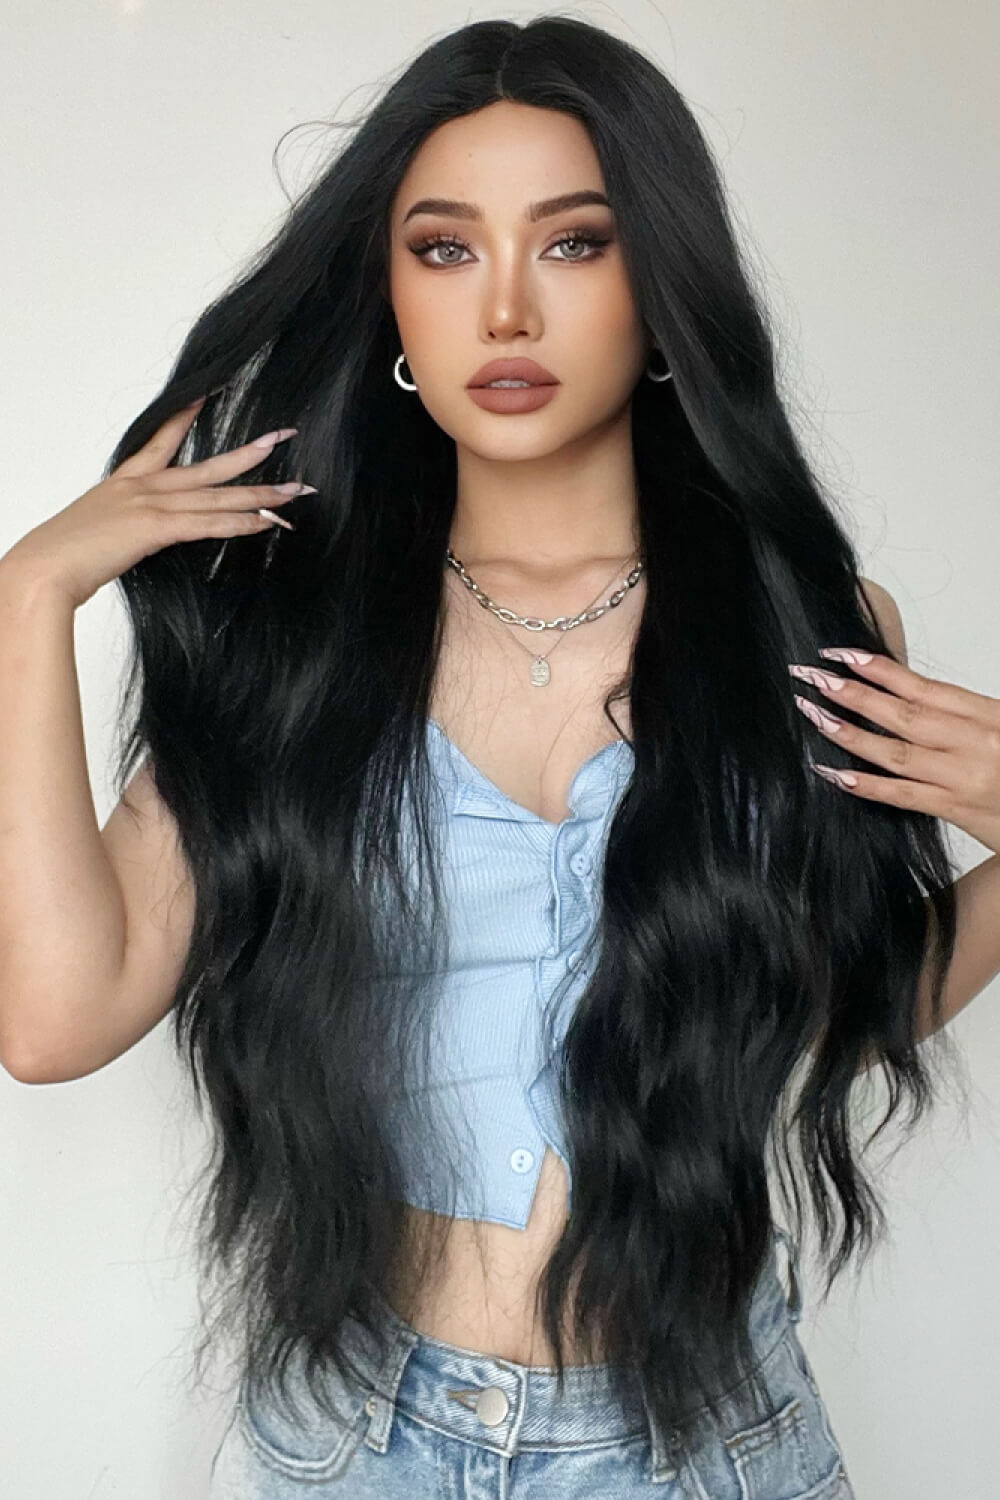 Full Machine Long Wave Synthetic Wigs 28'' COCO CRESS